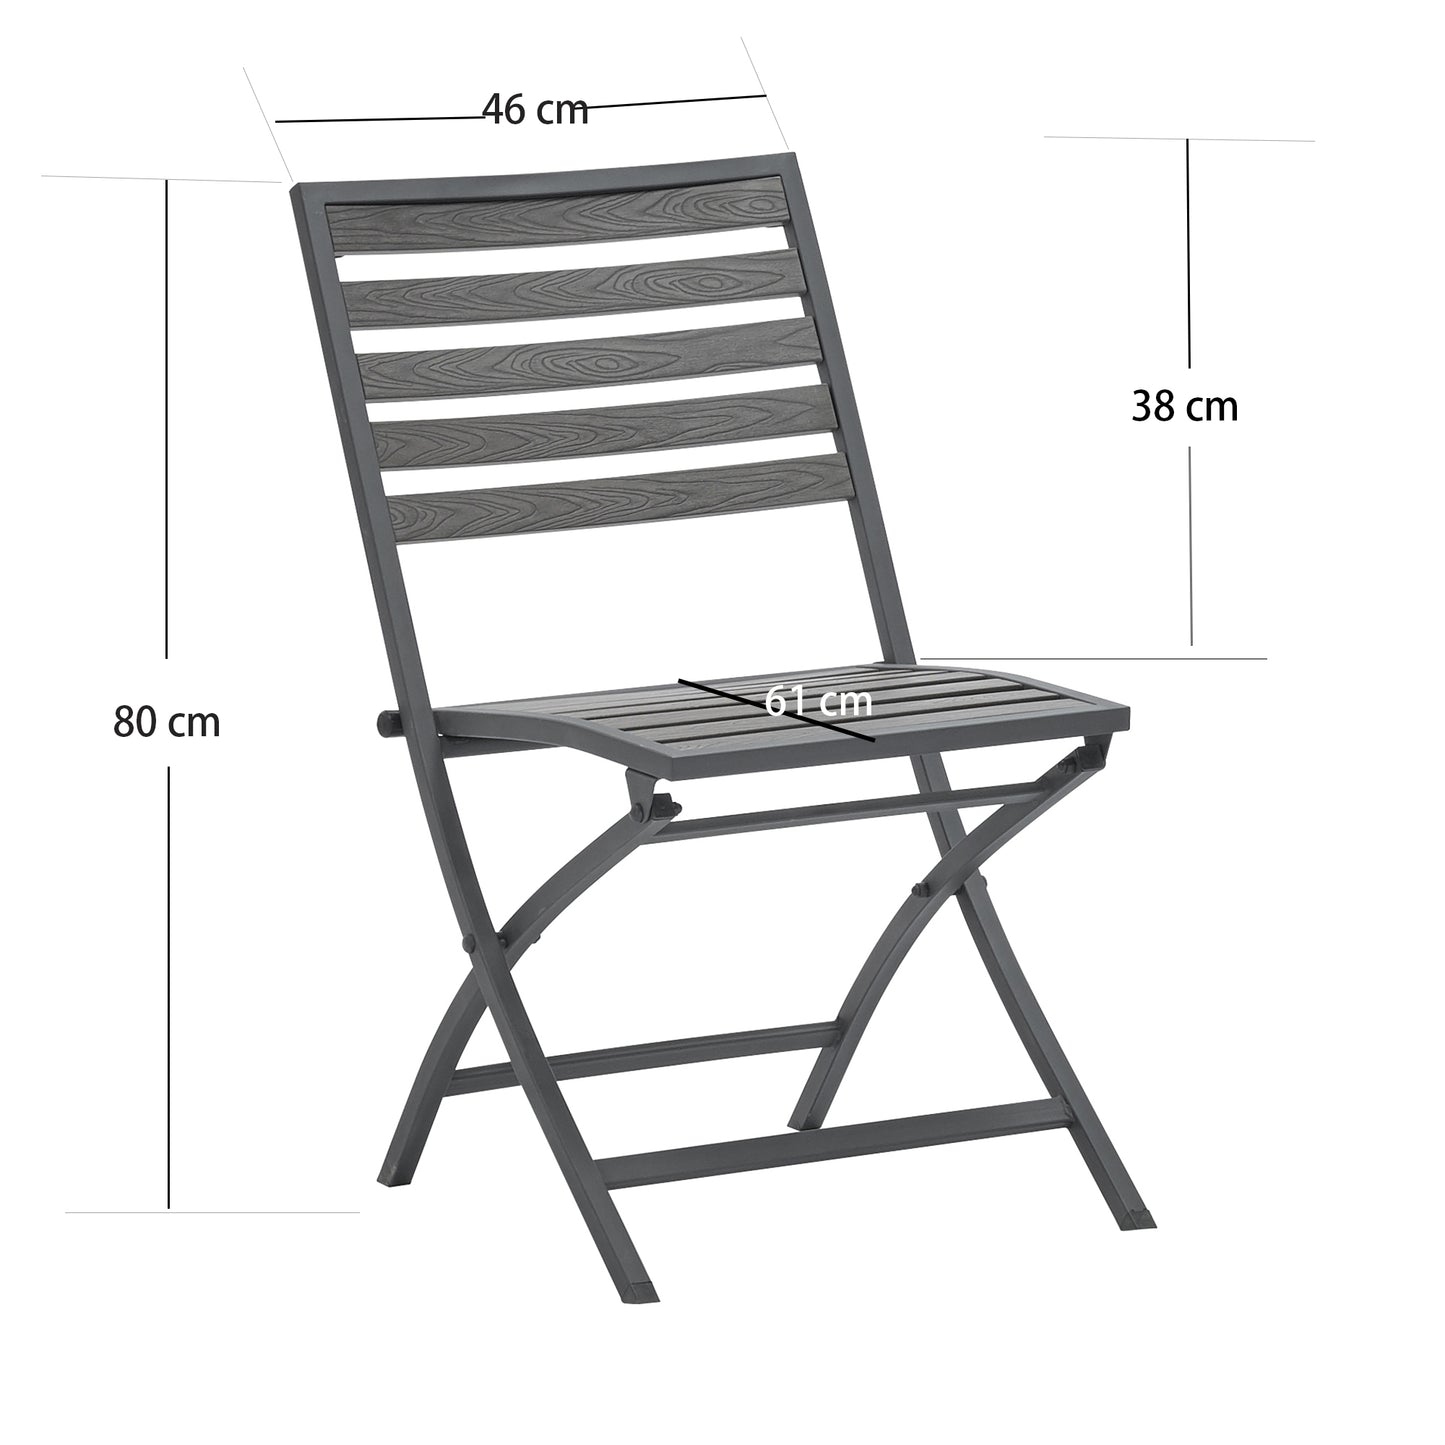 3-Piece All-Weather Folding Table and Chair Plastic Wood Outdoor